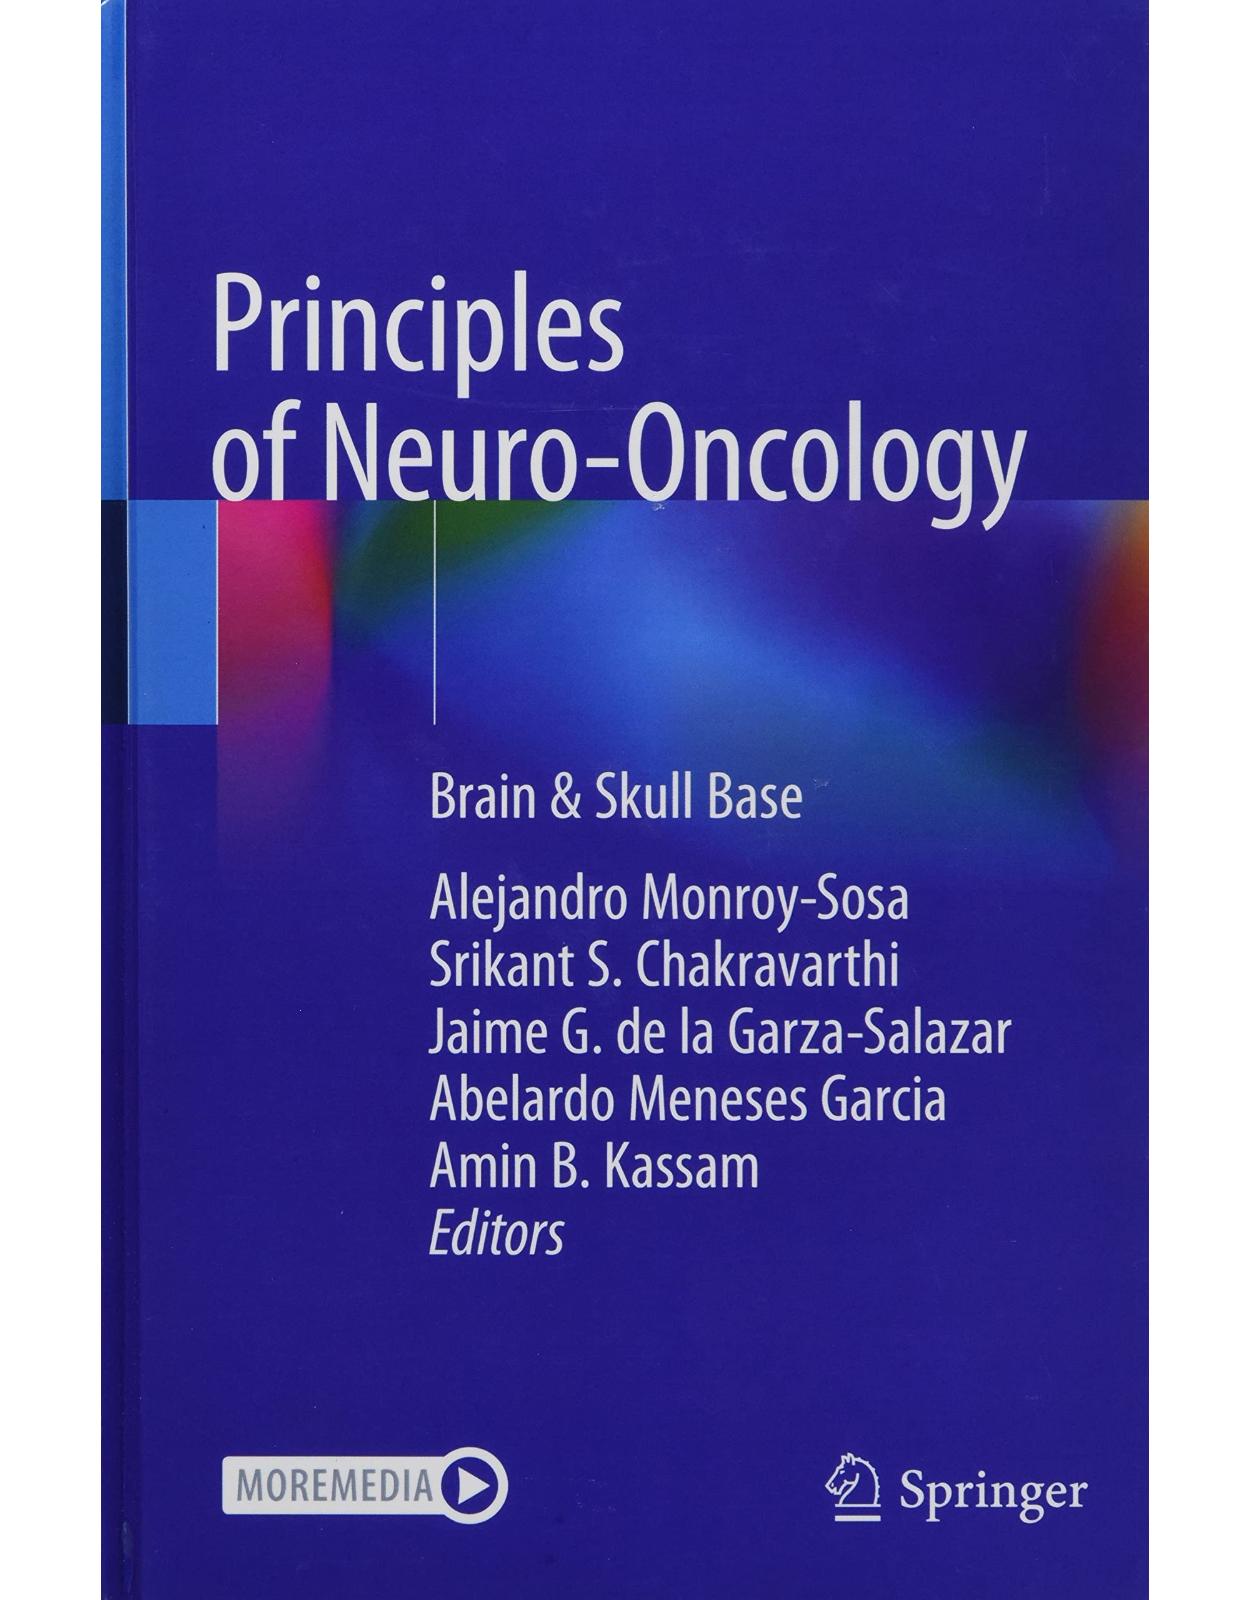 Principles of Neuro-Oncology